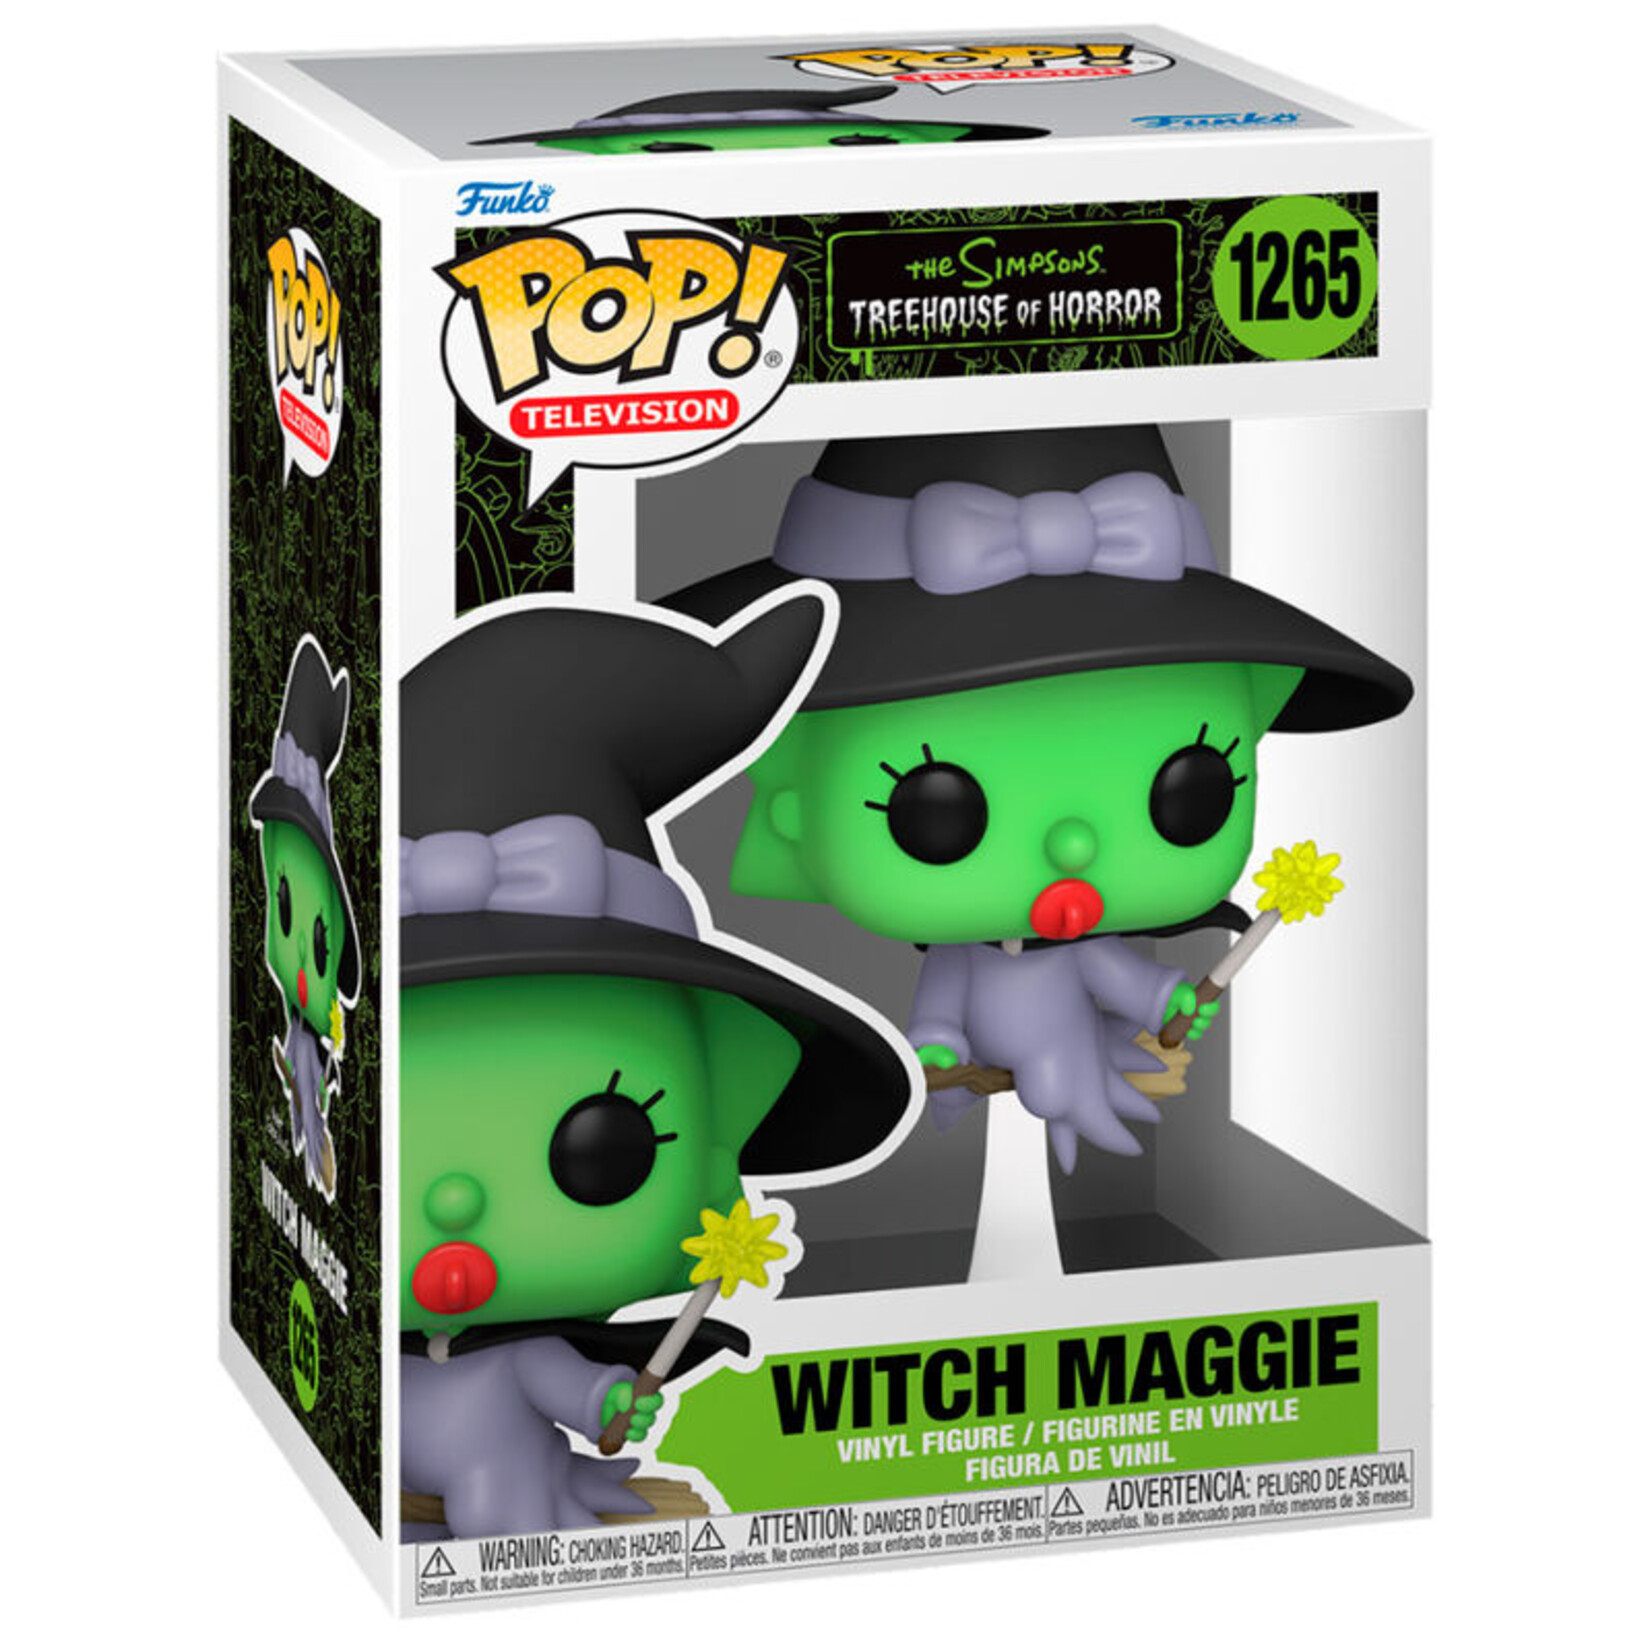 Funko Funko POP! Television Figure The Simpsons Witch Maggie